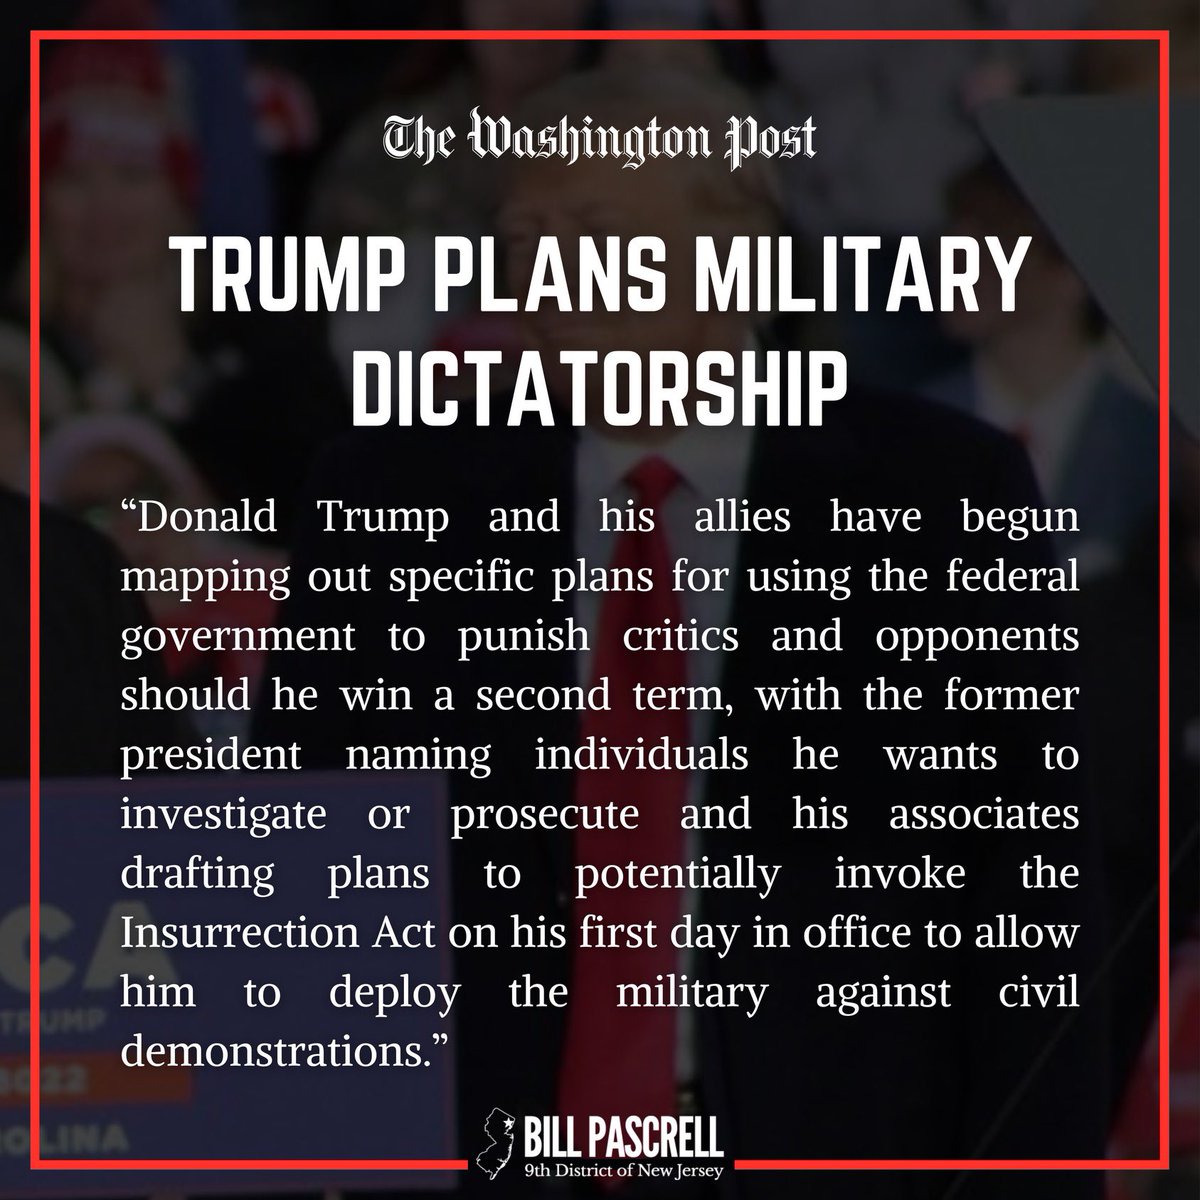 Yesterday donald trump openly admitted he is planning to impose a military dictatorship if he seizes power again. I am going to post this repeatedly so no one can say they haven’t been told.